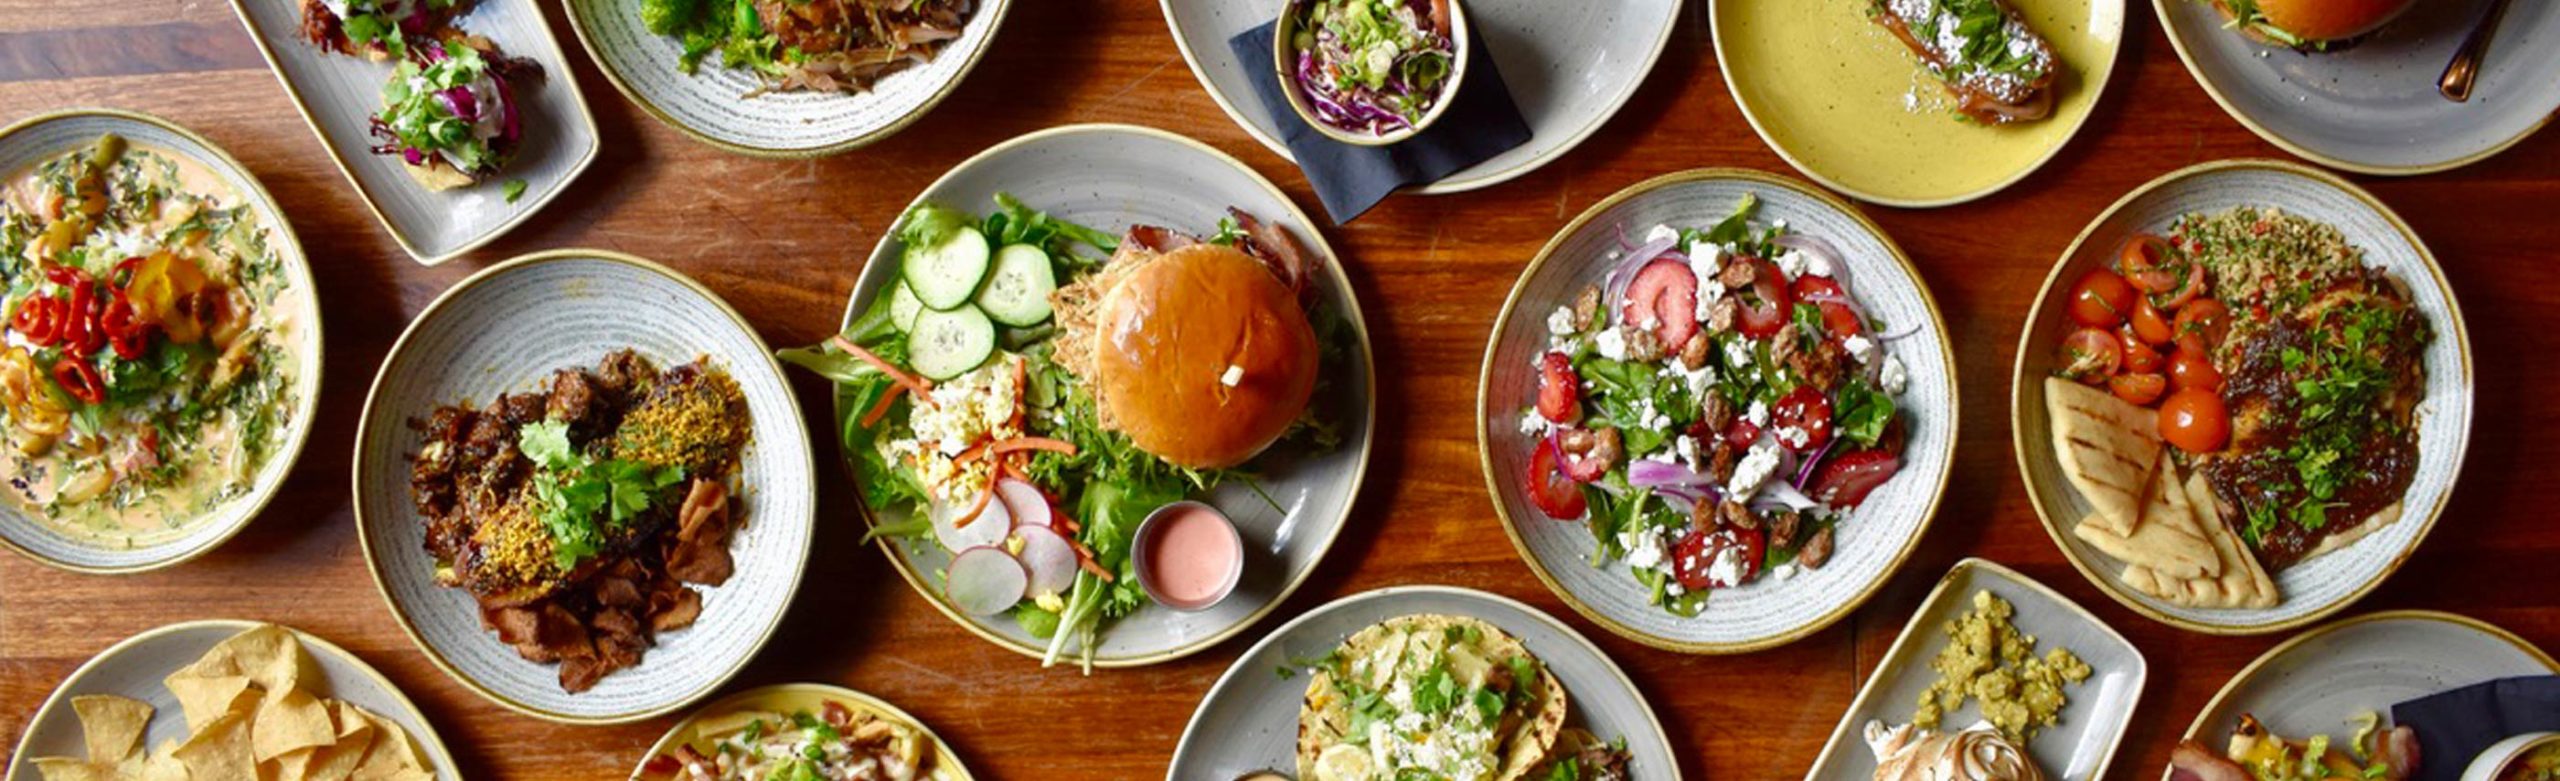 Top Hat Launches Globally Inspired Summer Menu Image